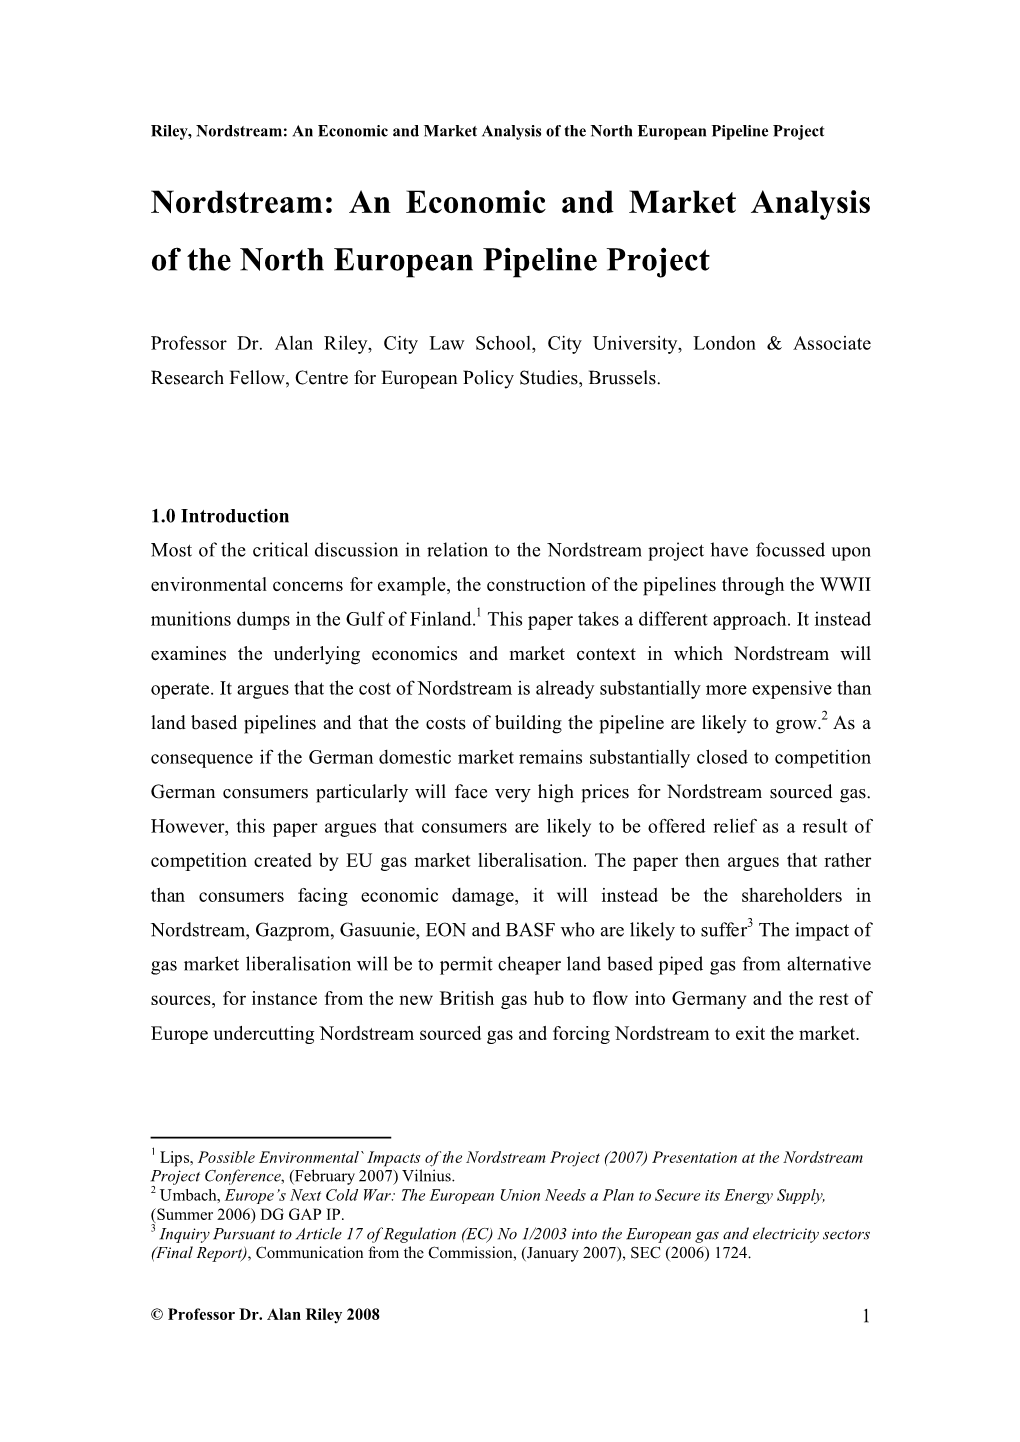 Nordstream: an Economic and Market Analysis of the North European Pipeline Project